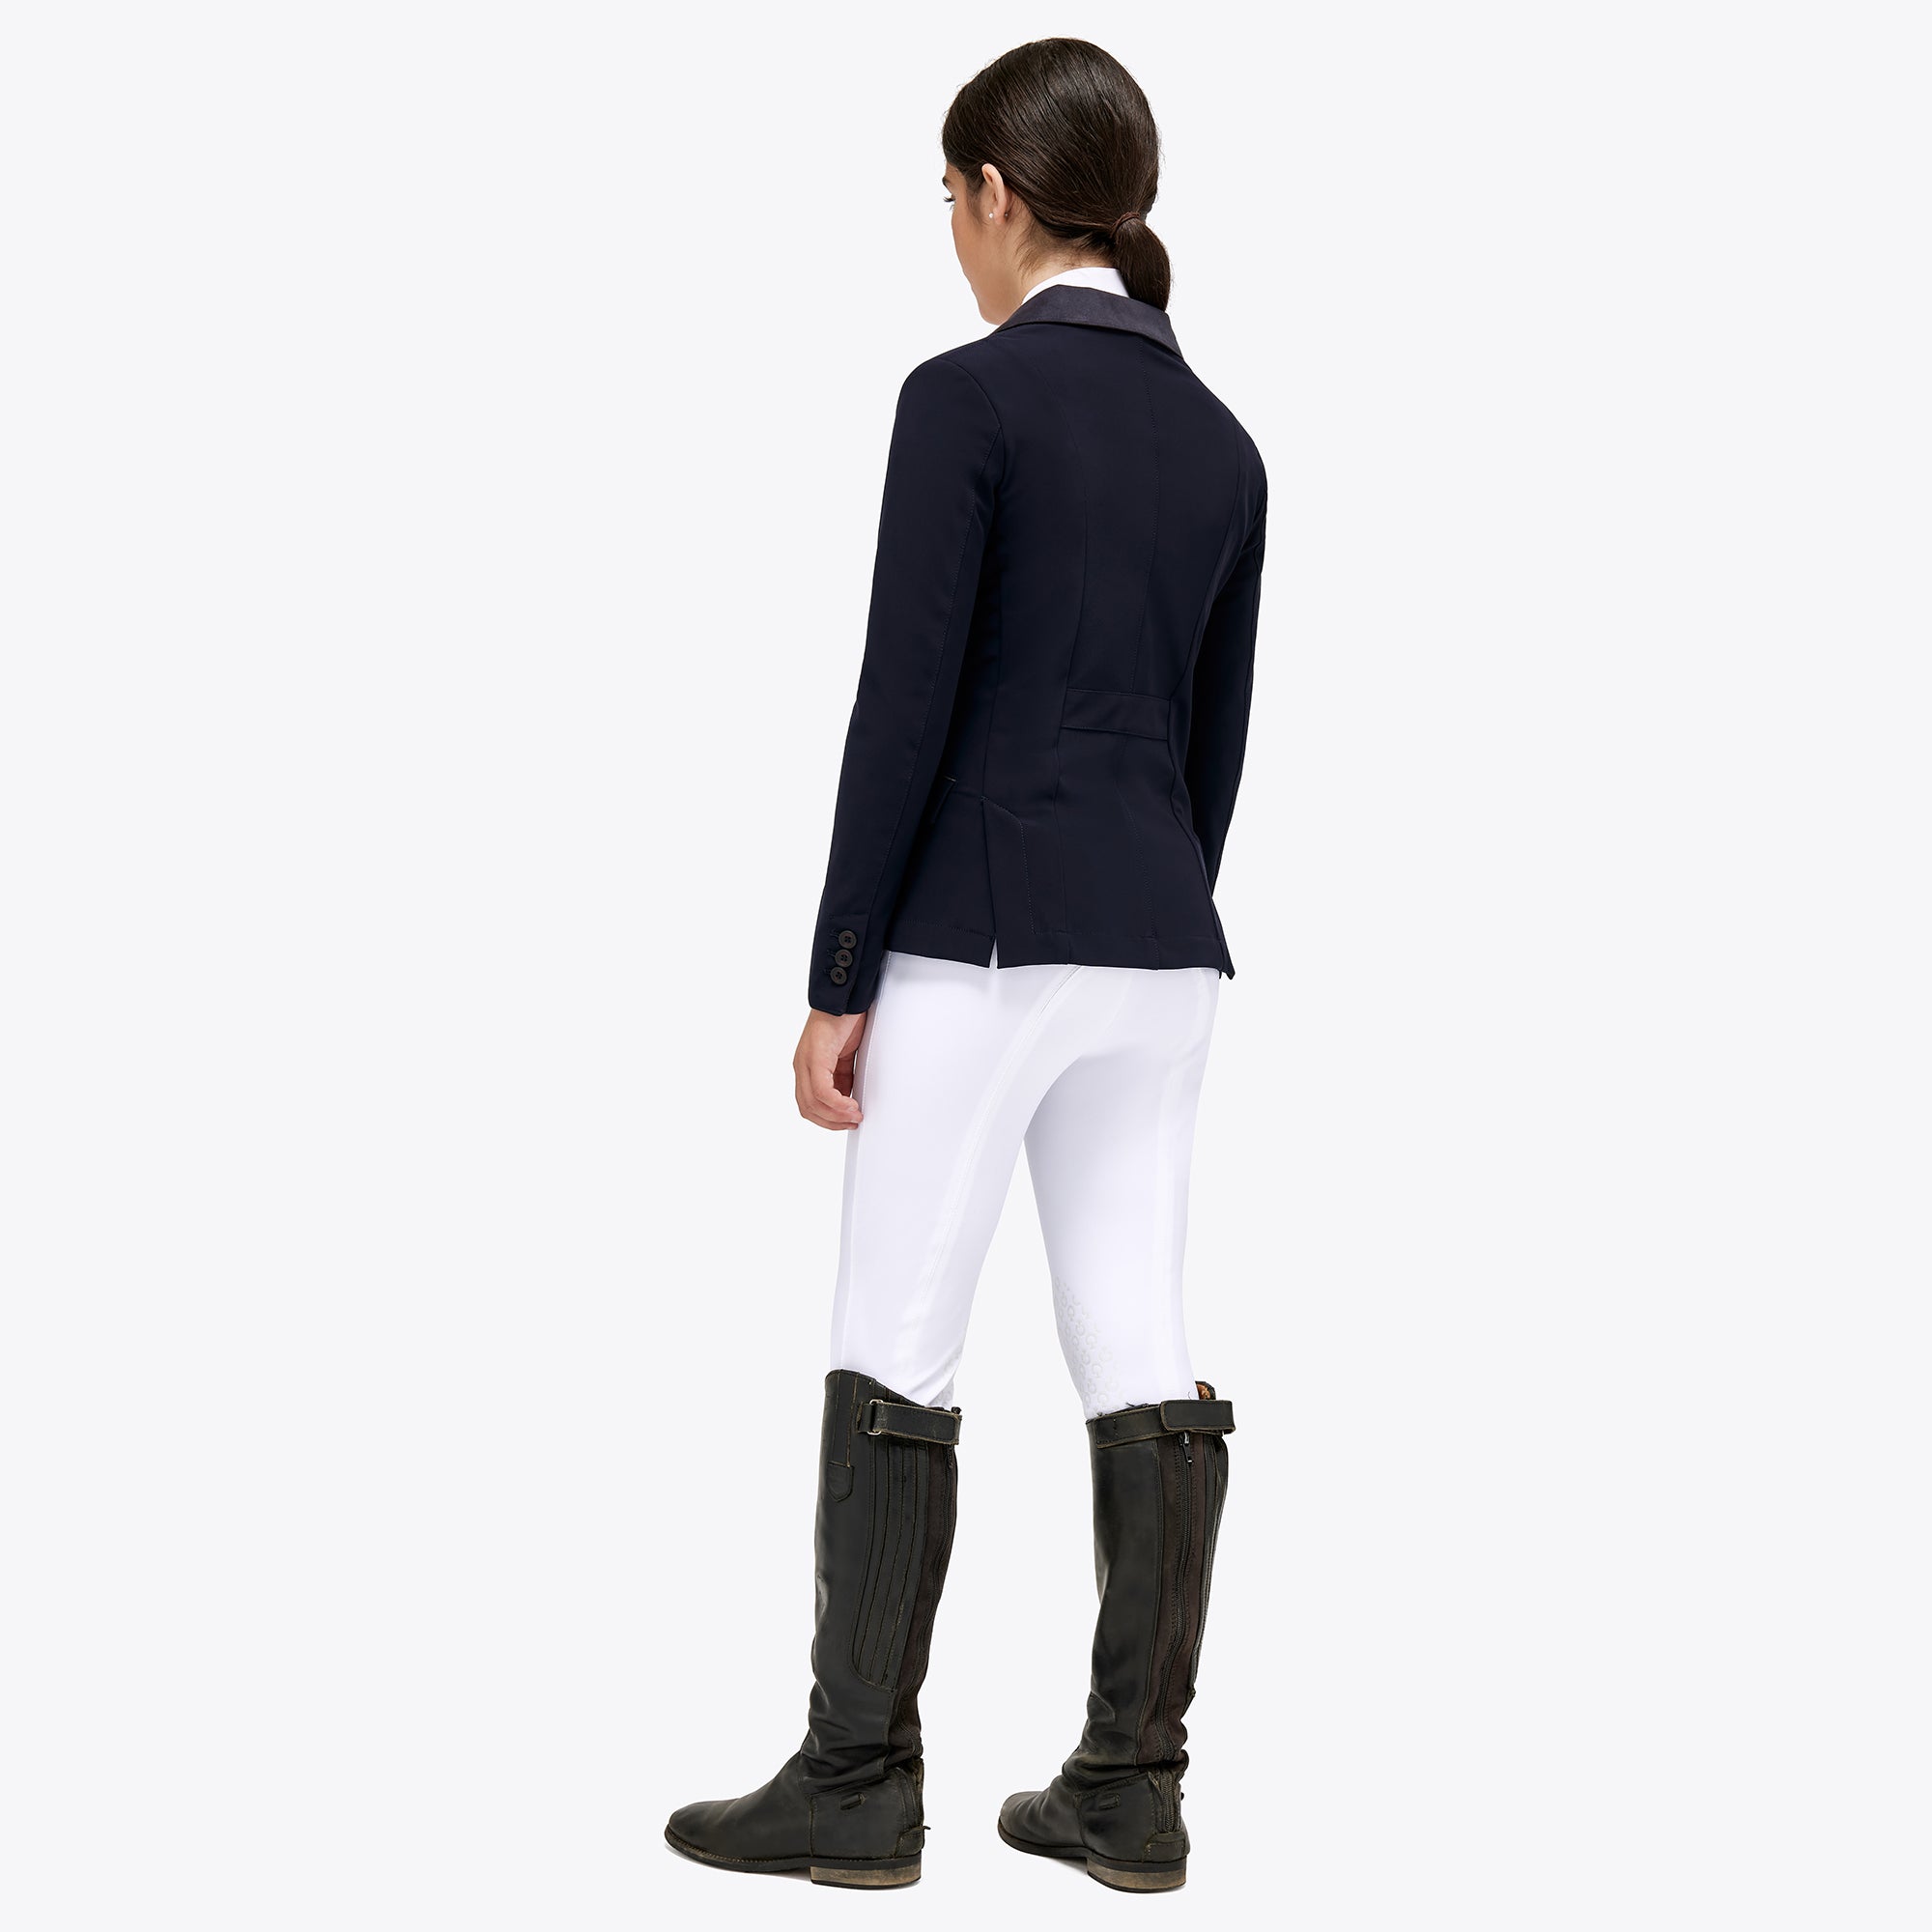 Girls Young Rider Show Jacket - Navy